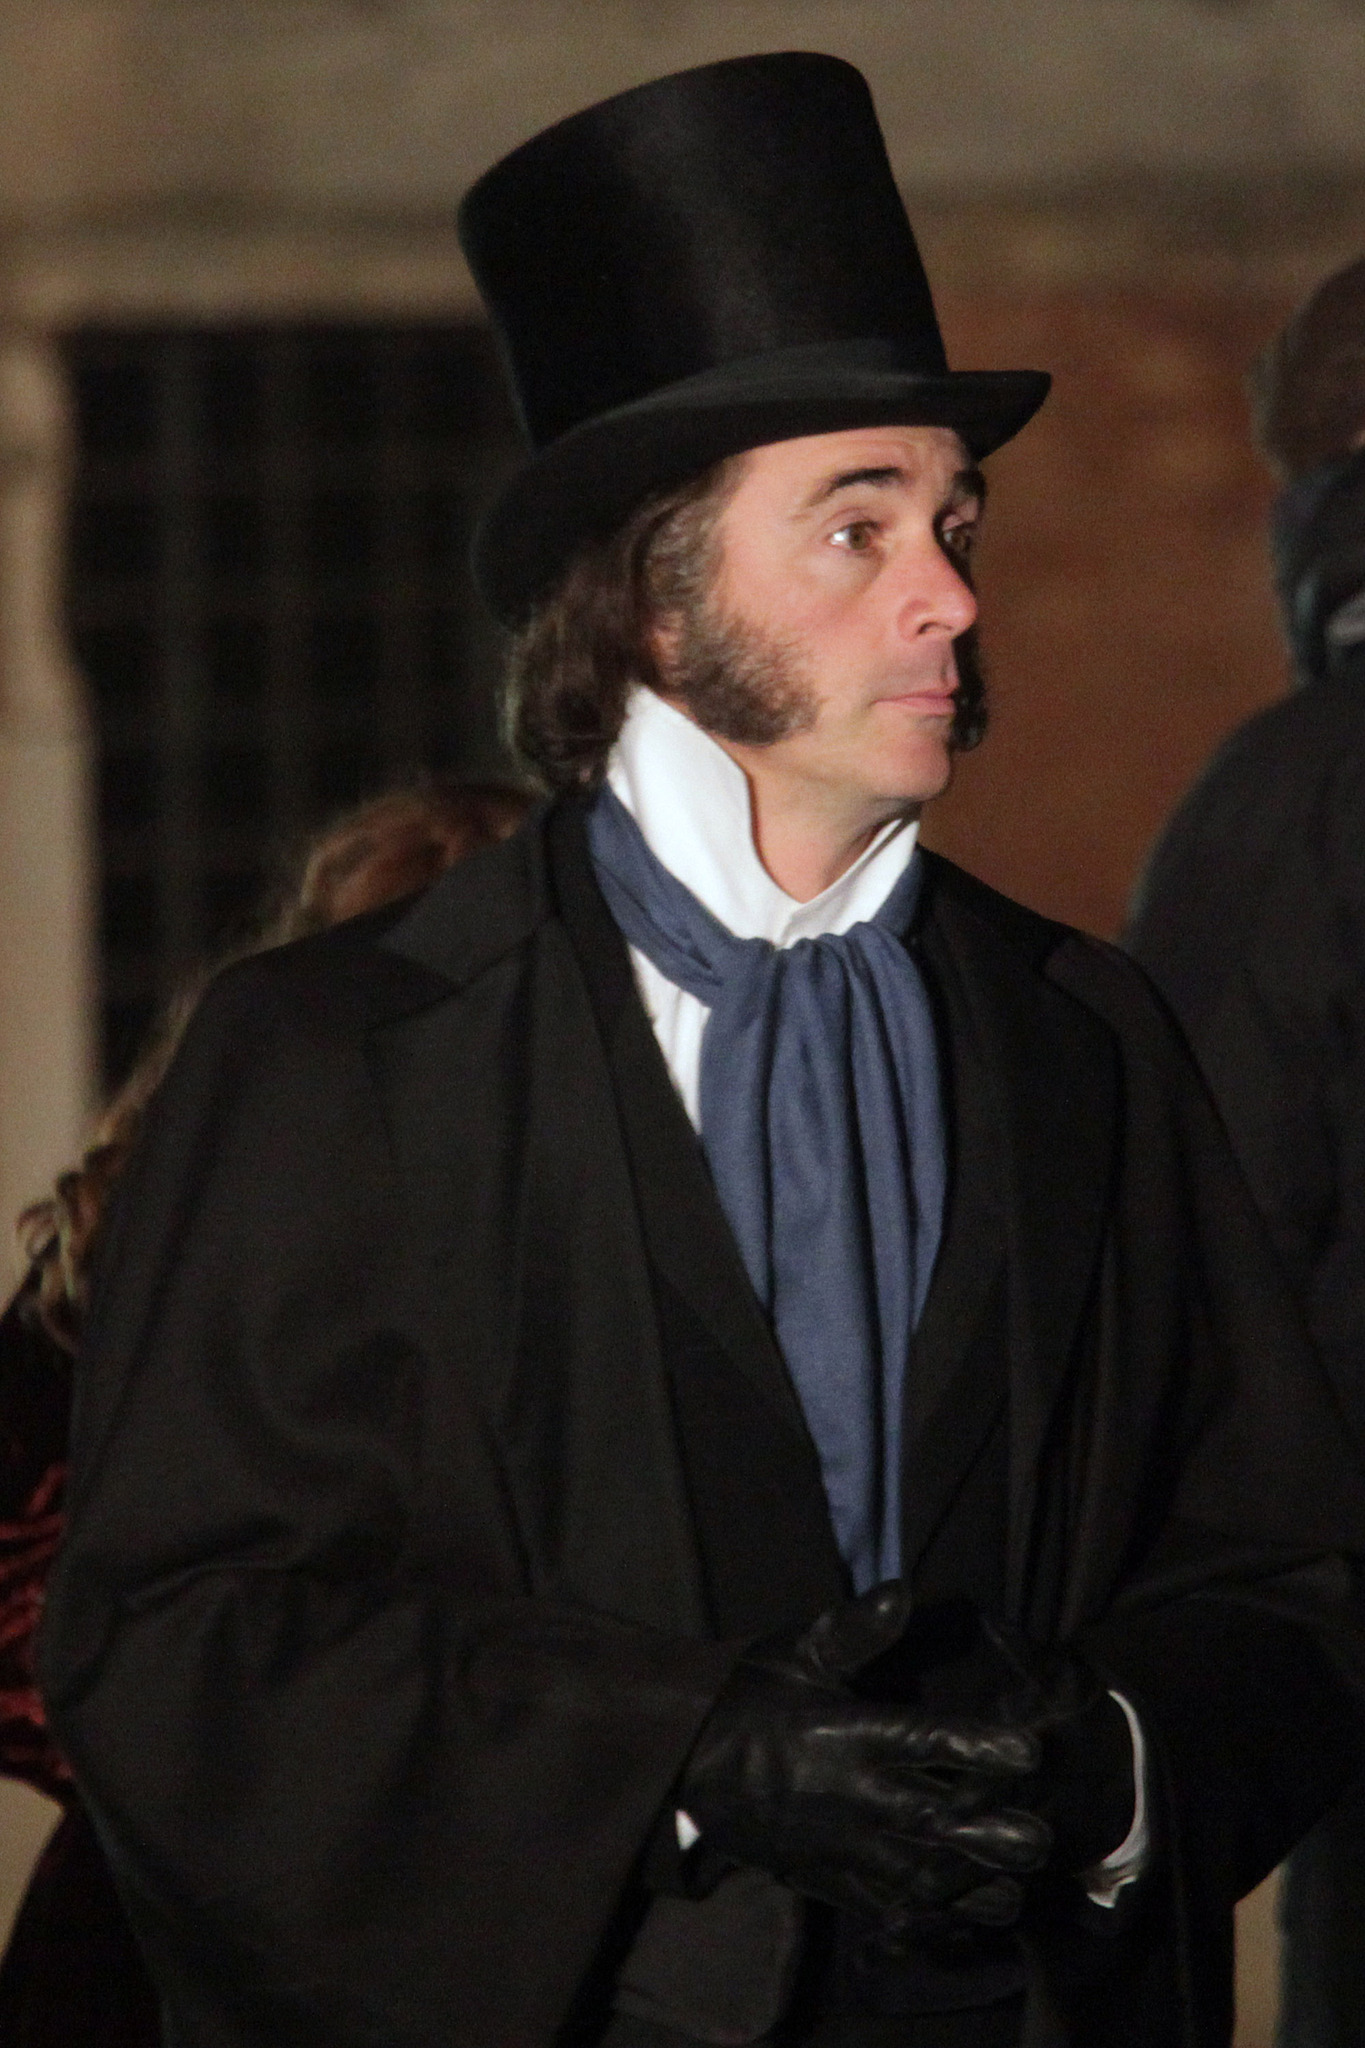 Greg Wise at event of Effie Gray (2014)